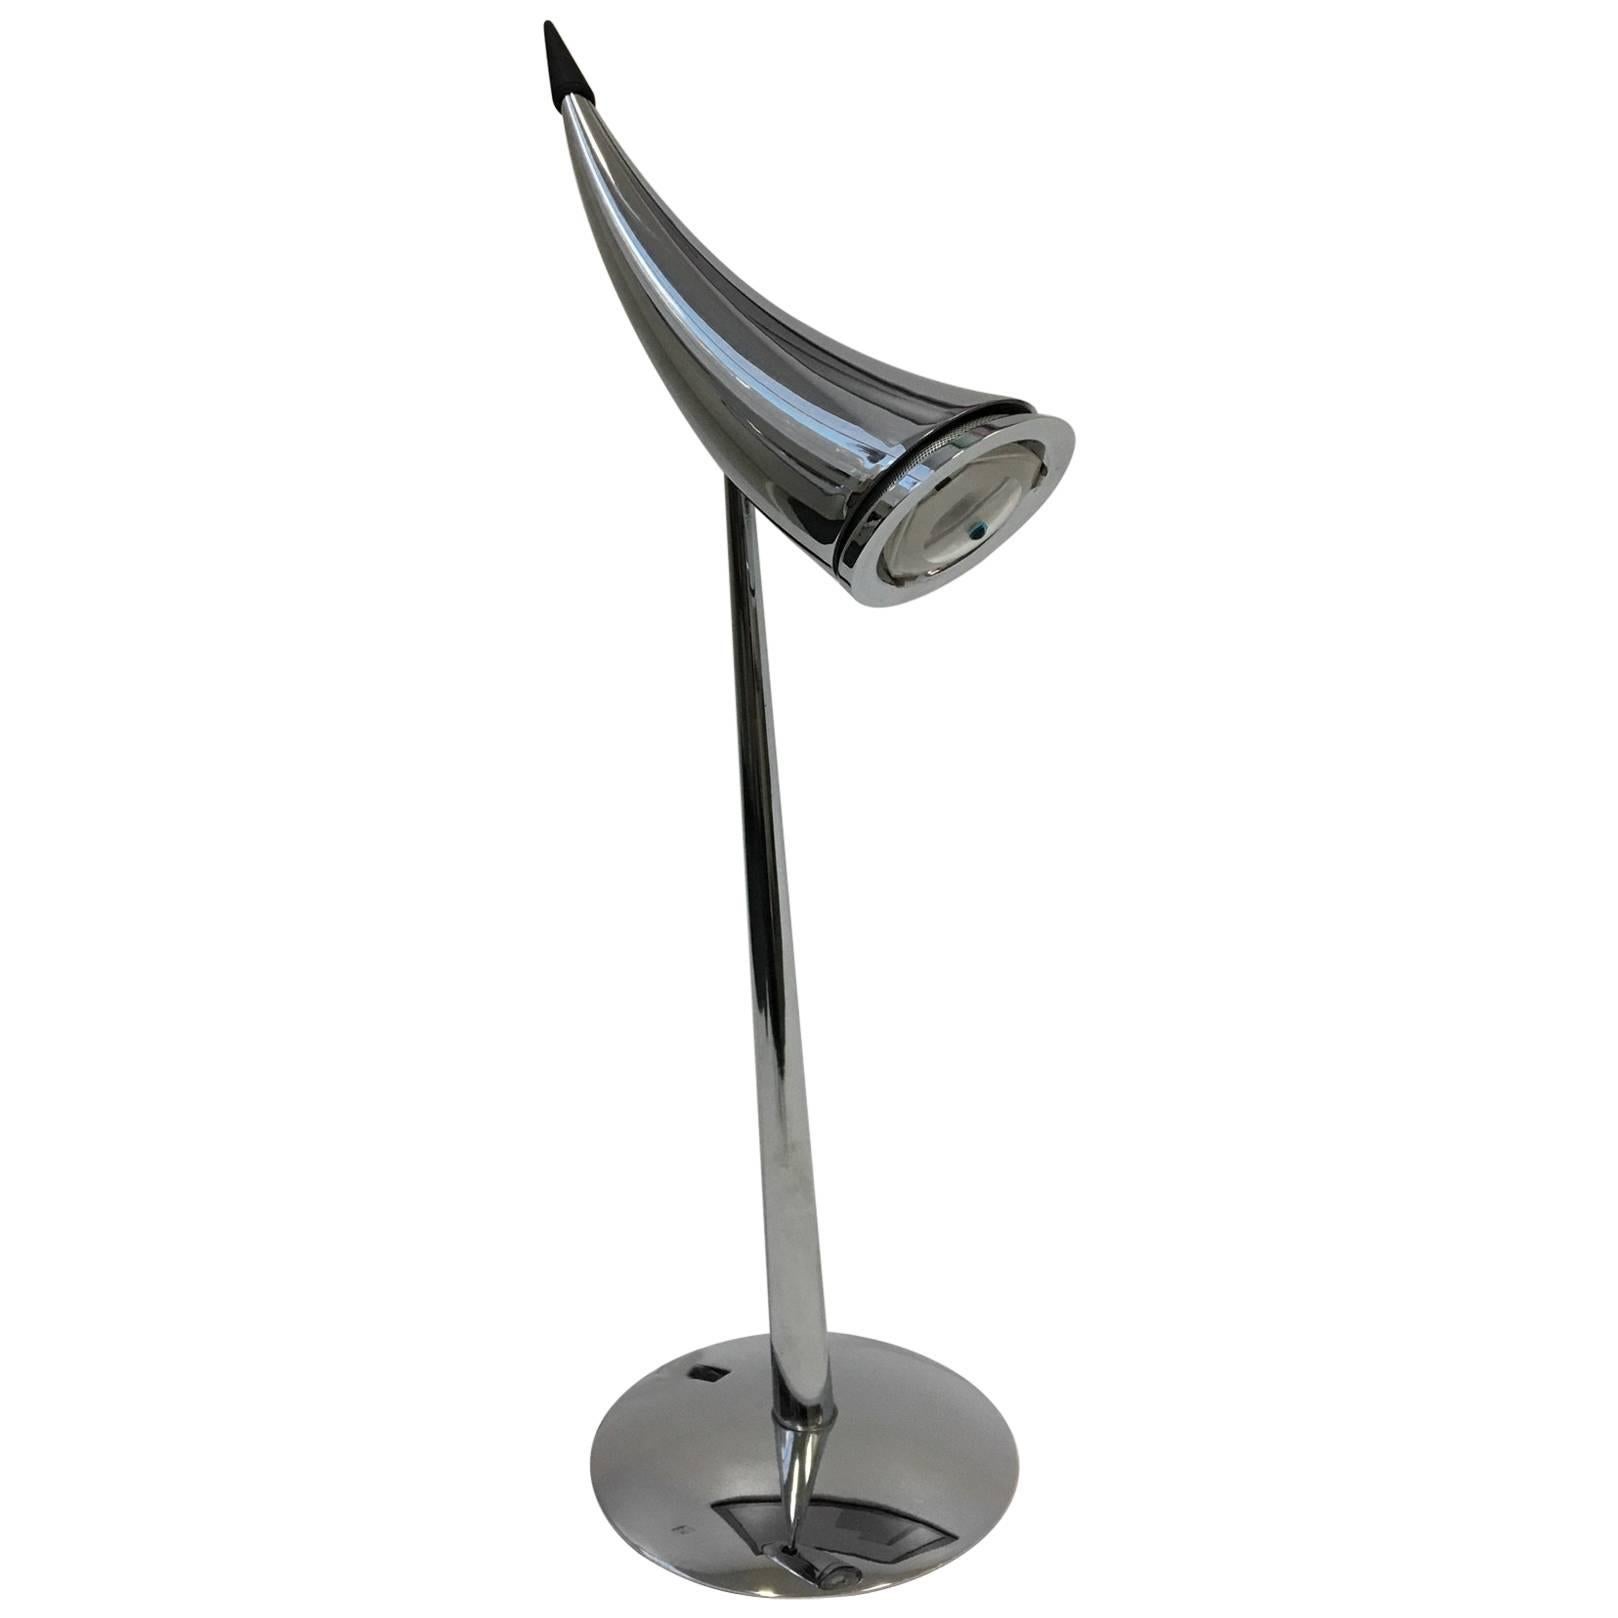 Italian Chrome "Ara" Table Lamp by Philippe Starck for Flos